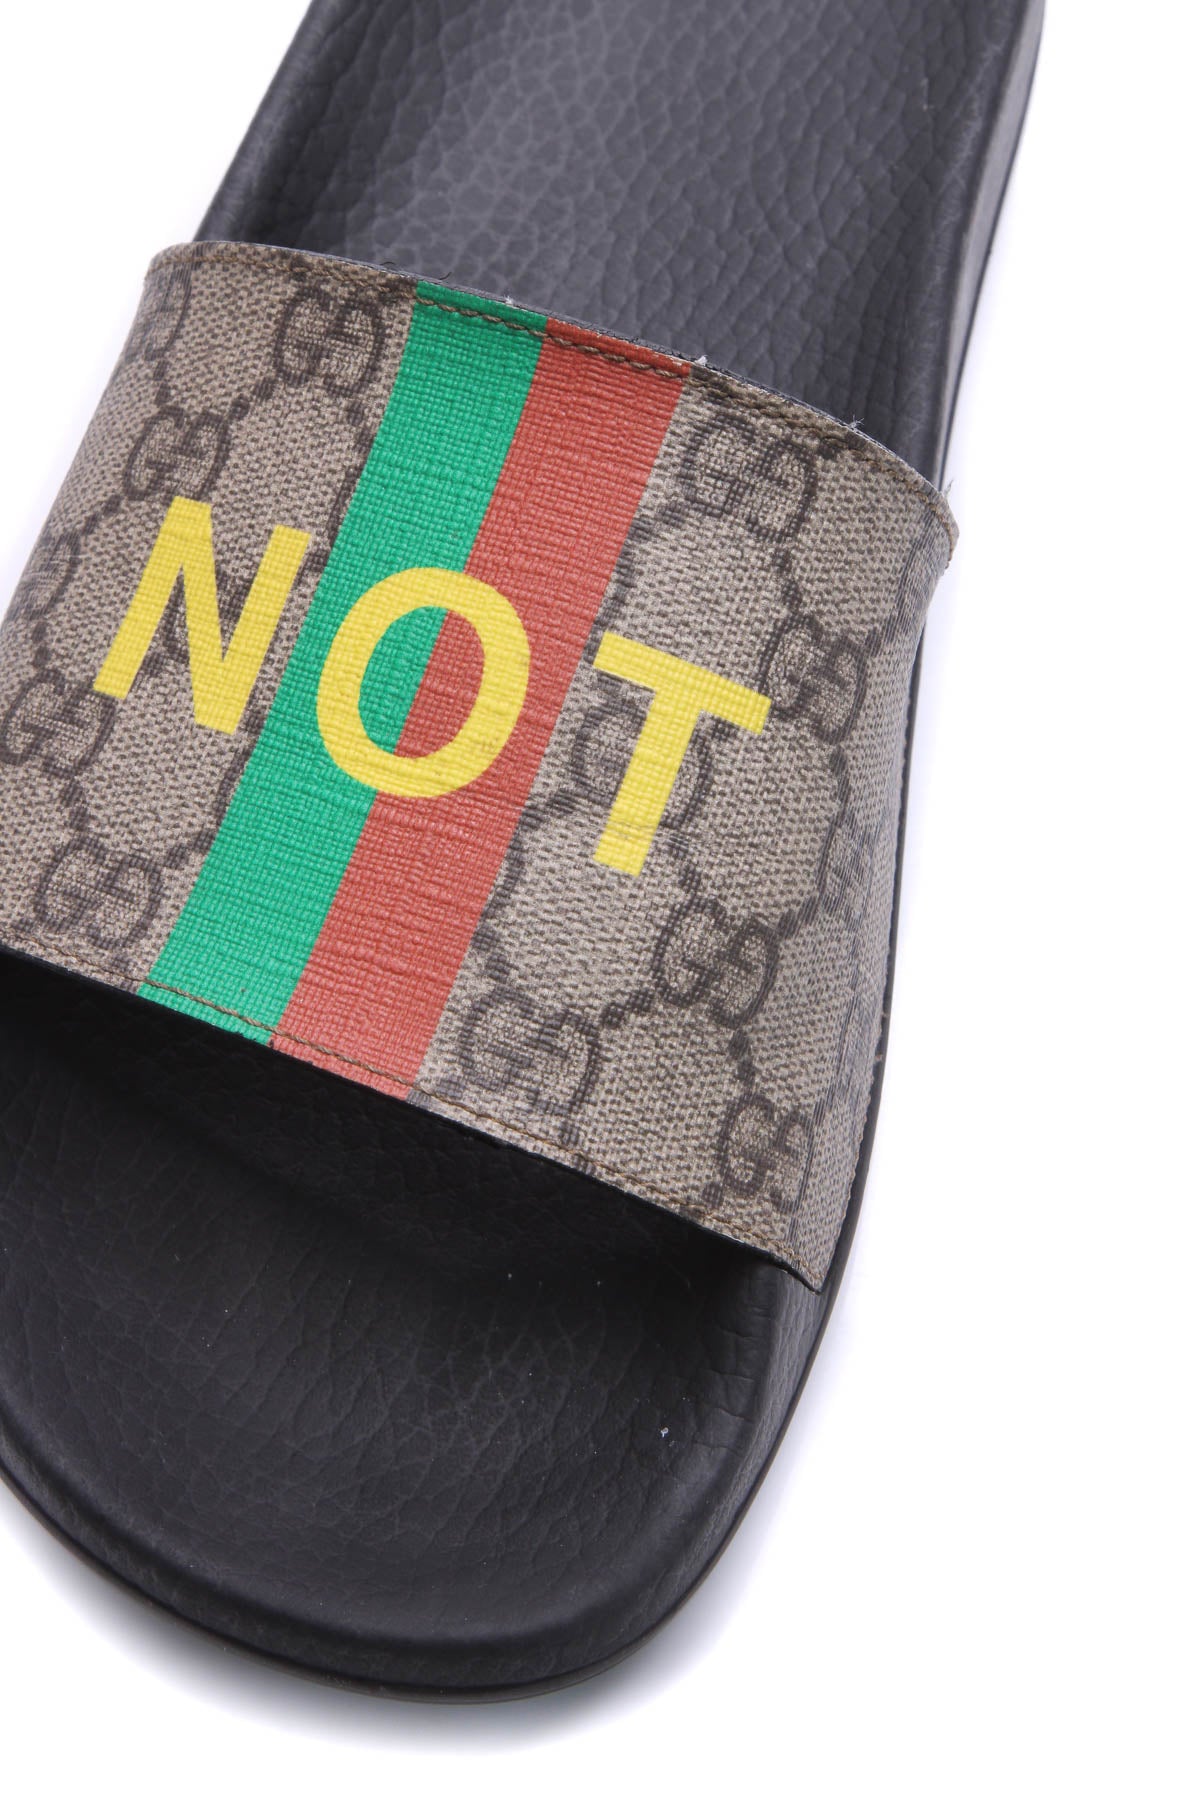 Kabelbane Permanent Produktion Gucci "Not Fake" Printed Slide Sandals - Supreme Size 41 - Couture USA